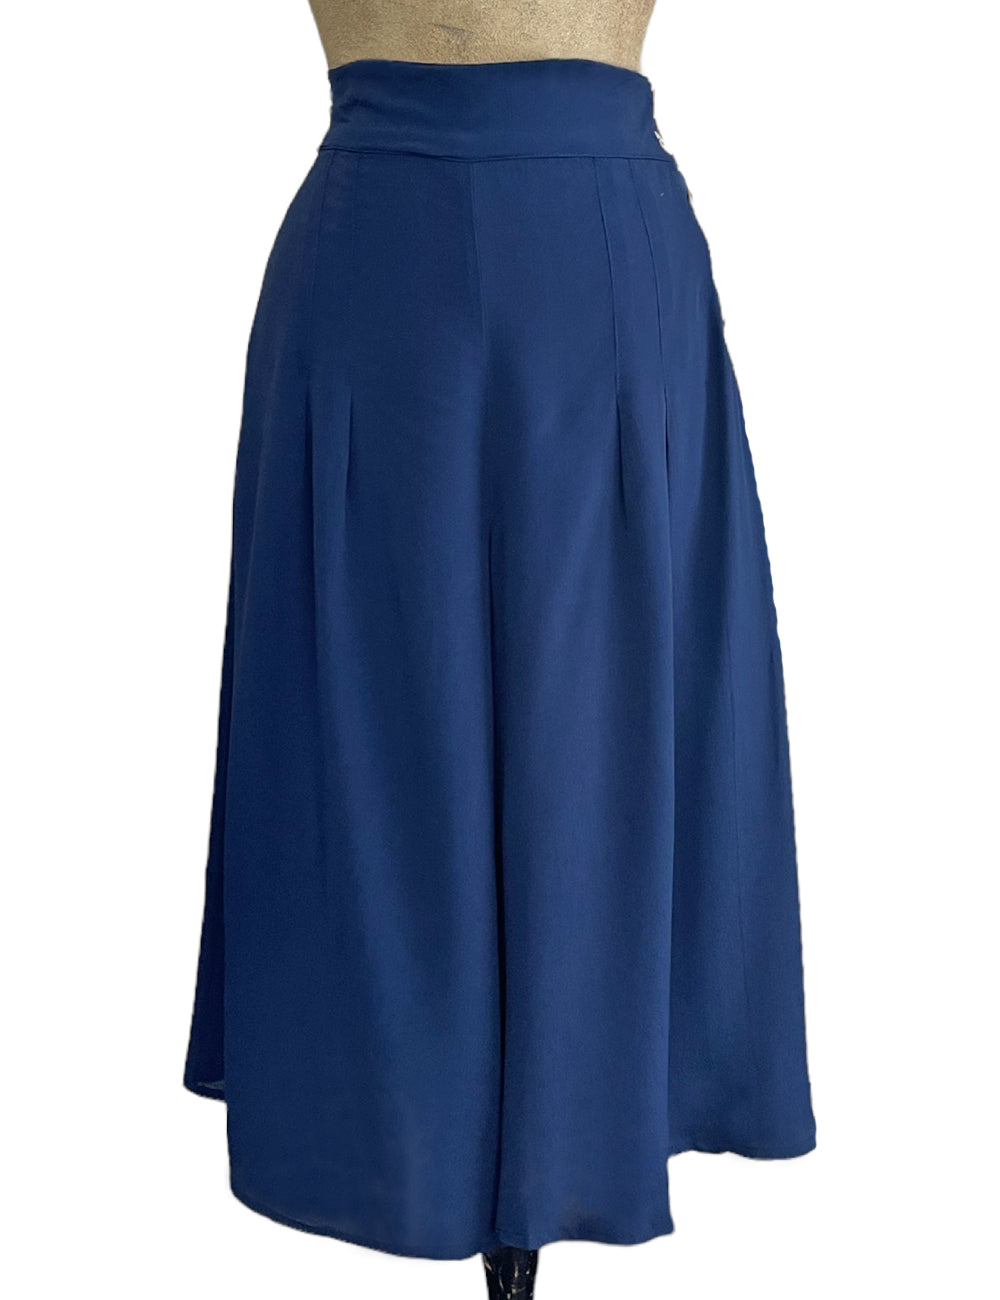 FINAL SALE - Solid Navy Blue Retro High Waisted Wide Leg Culottes